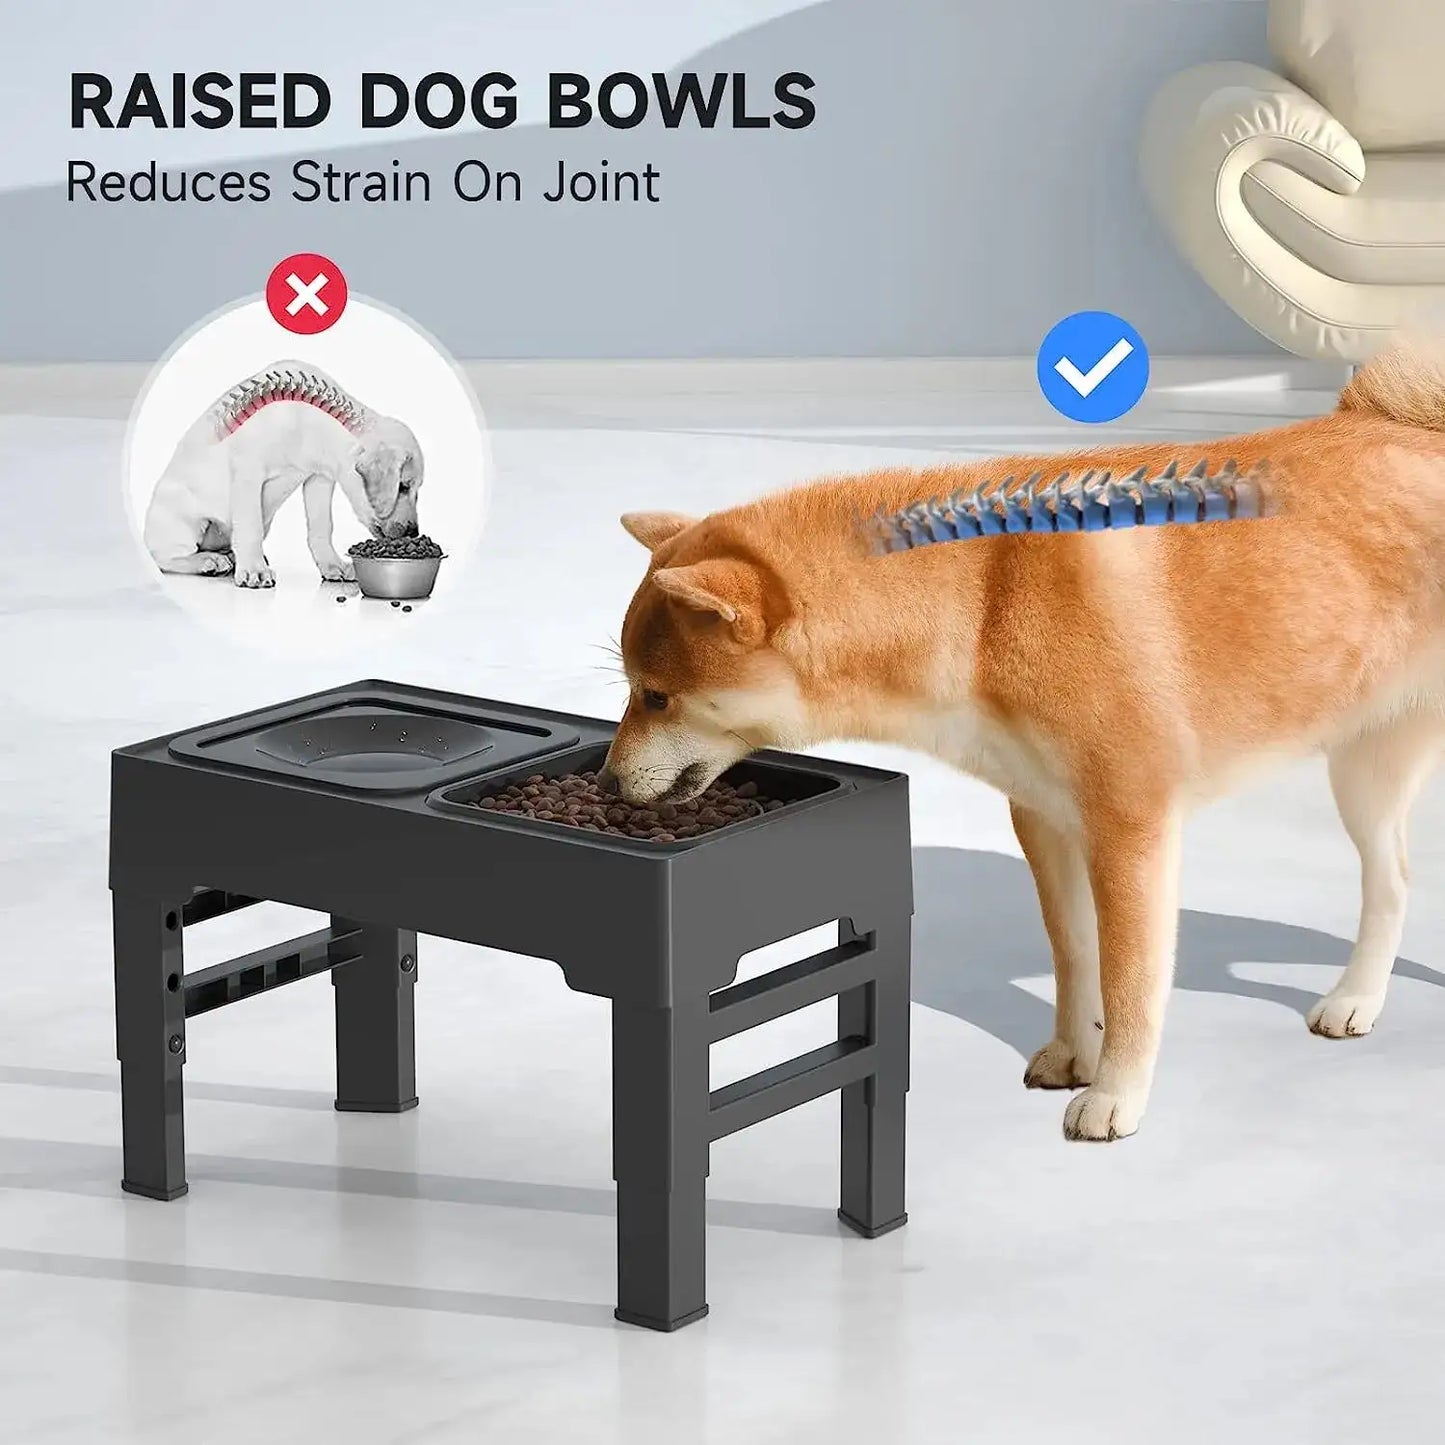 FlexiFeed: The Ultimate Adjustable Dining Solution for Your Furry Friend!"